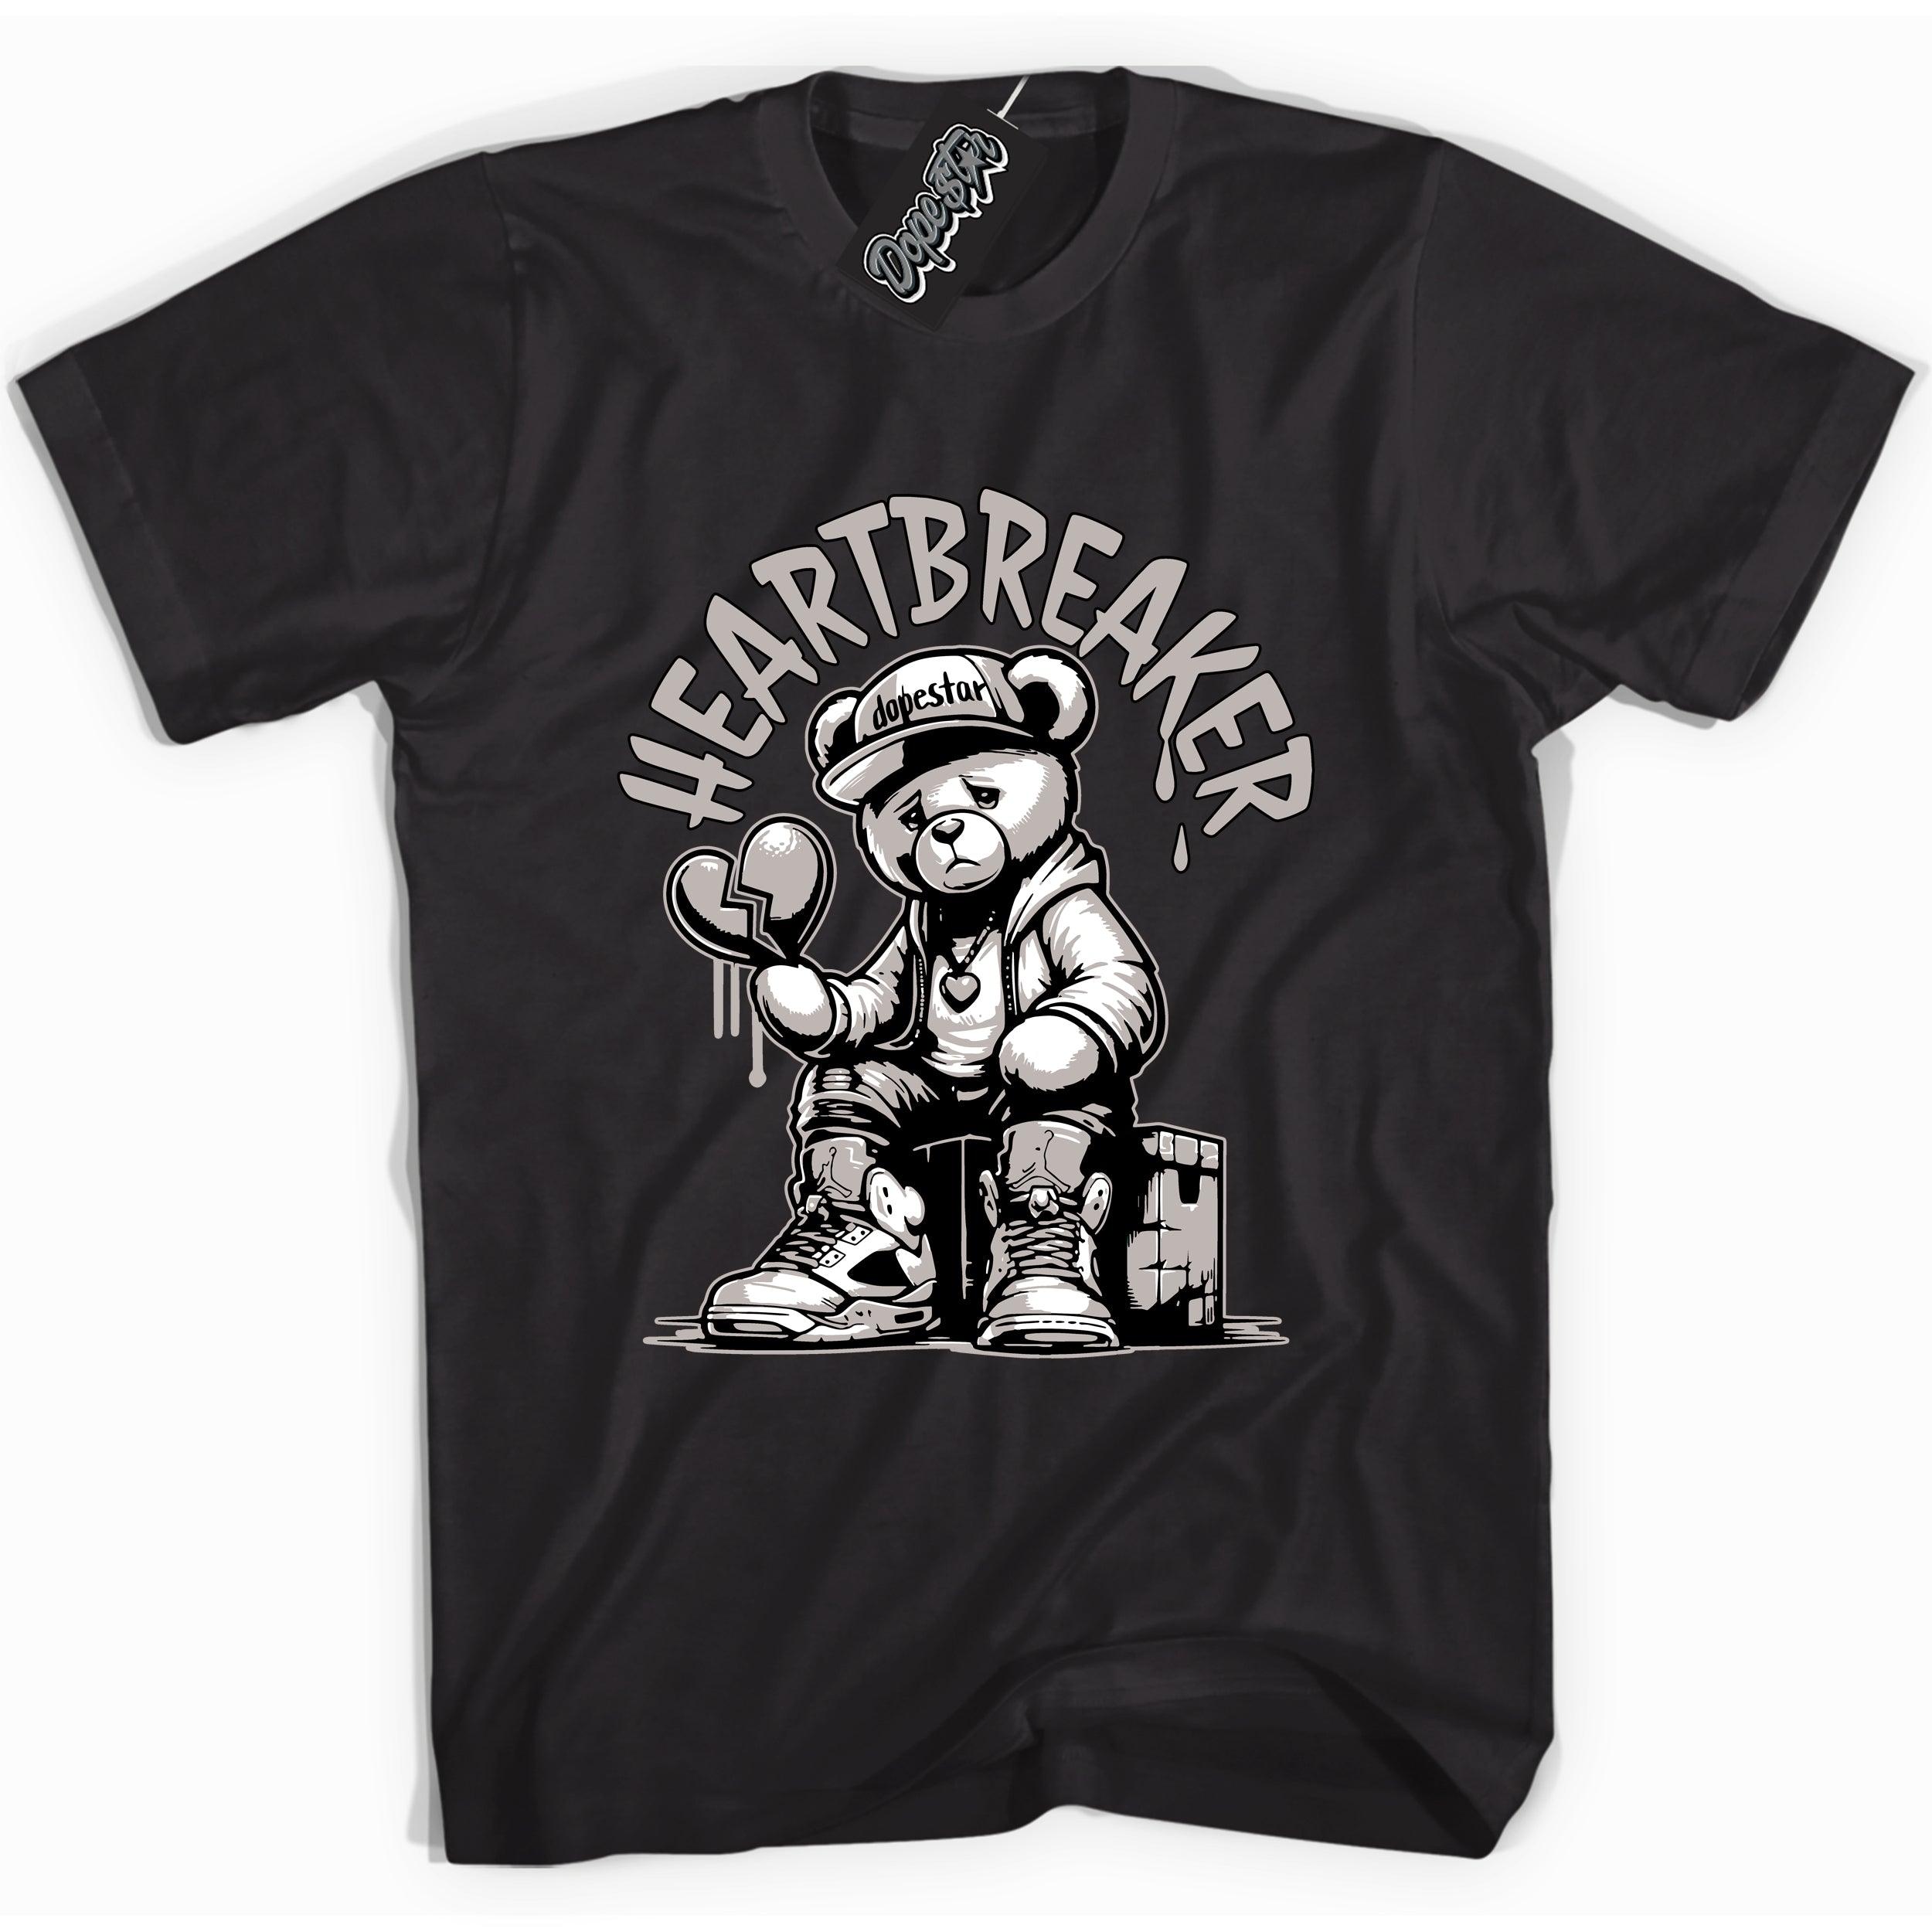 Cool Black Shirt With Heartbreaker Bear design That Perfectly Matches AIR JORDAN 4 RETRO MILITARY BLACK Sneakers.